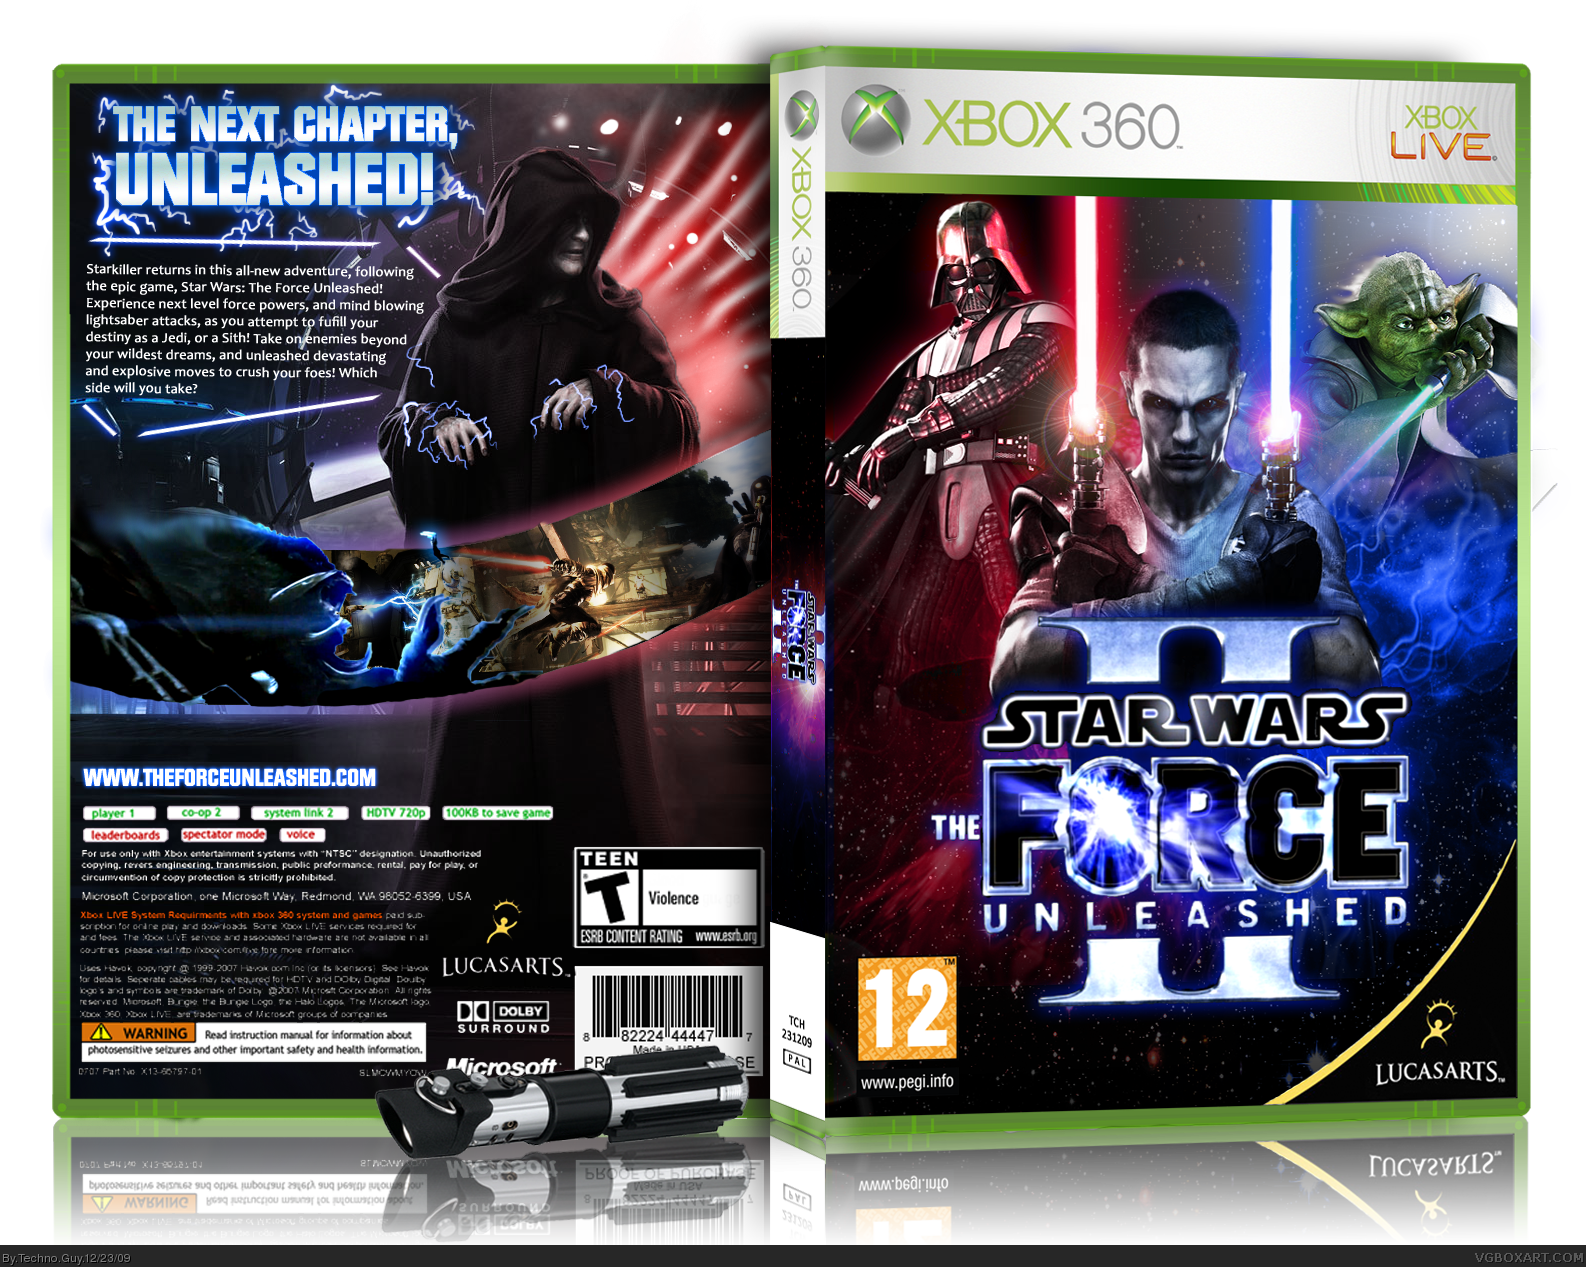 Star wars the force unleashed коды. Force unleashed Xbox 360. Стар ВАРС Xbox 360. Star Wars Force unleashed PC обложка. Star Wars Force unleashed 2 PC обложка.